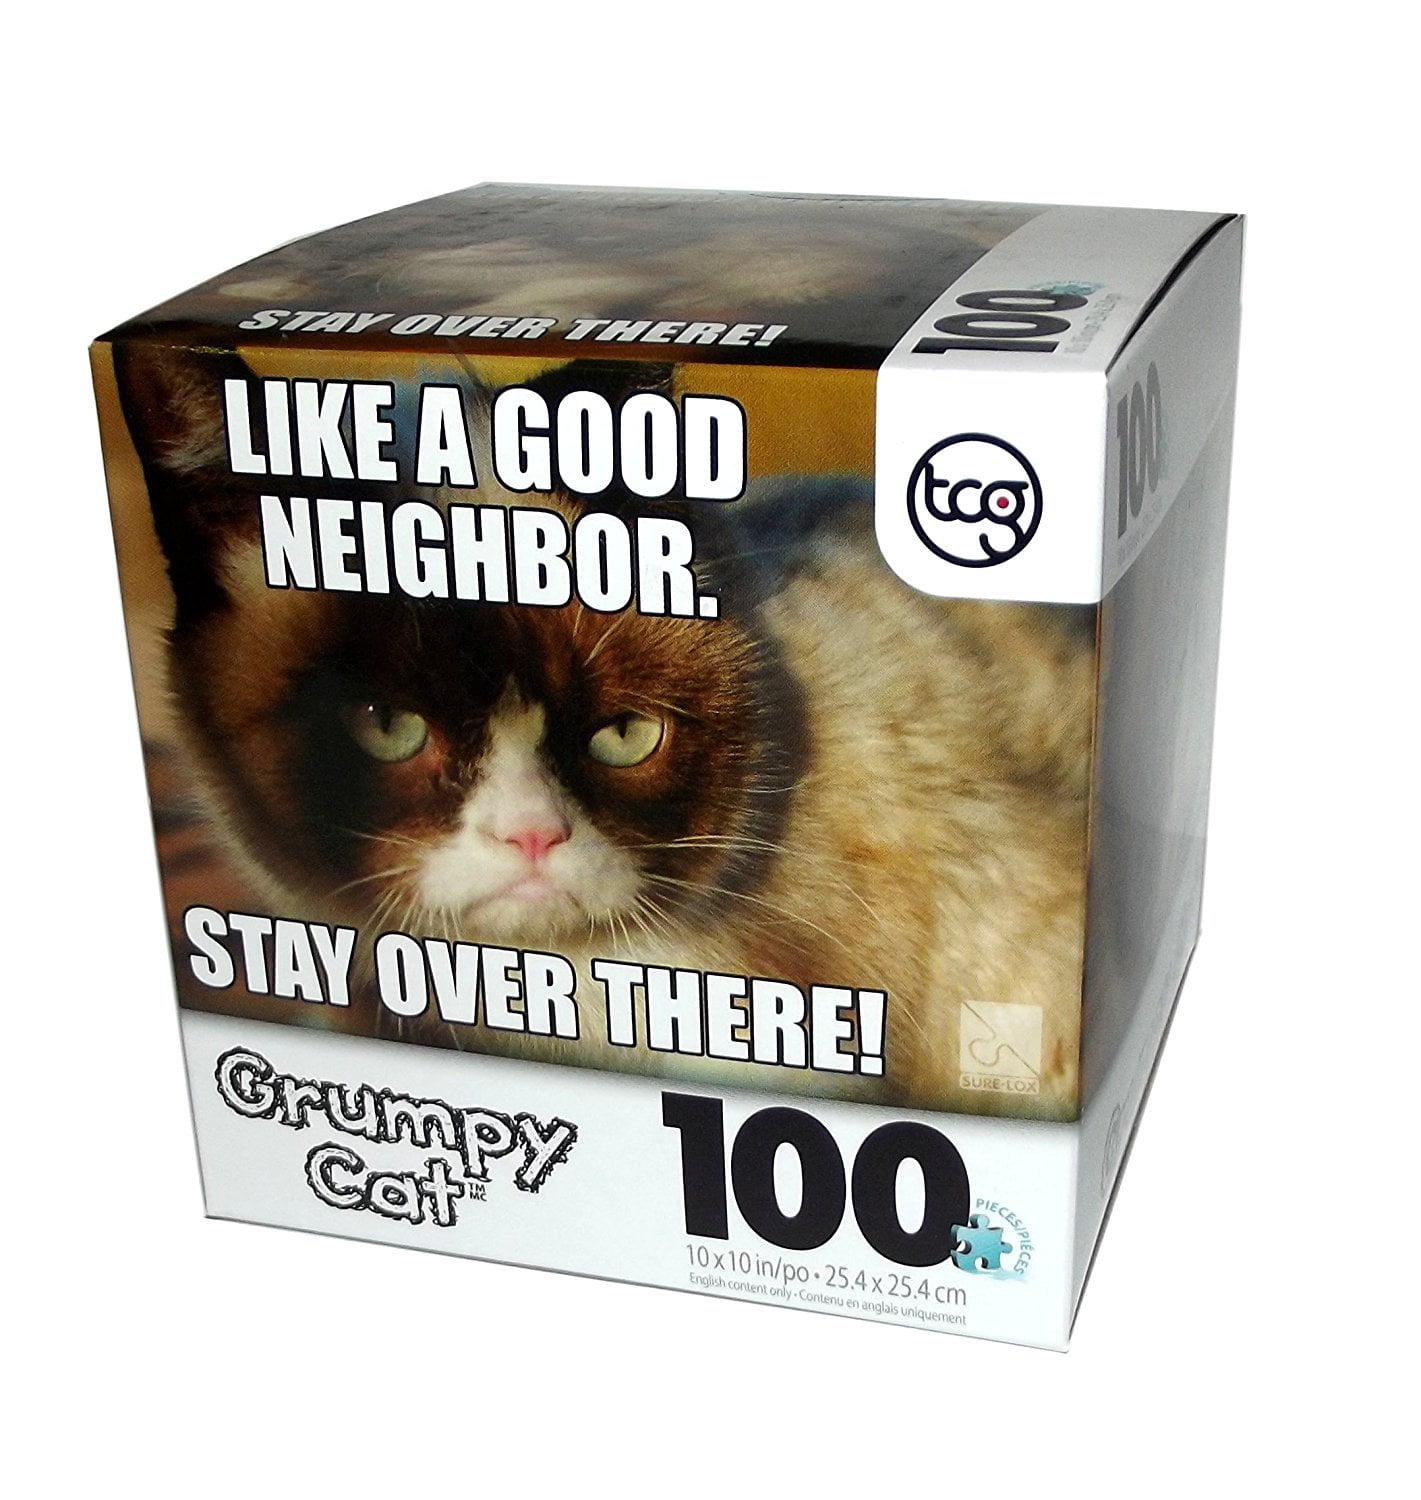 Grumpy Cat Like A Good Neighbor Puzzle100 pcs By The Canadian Grpup